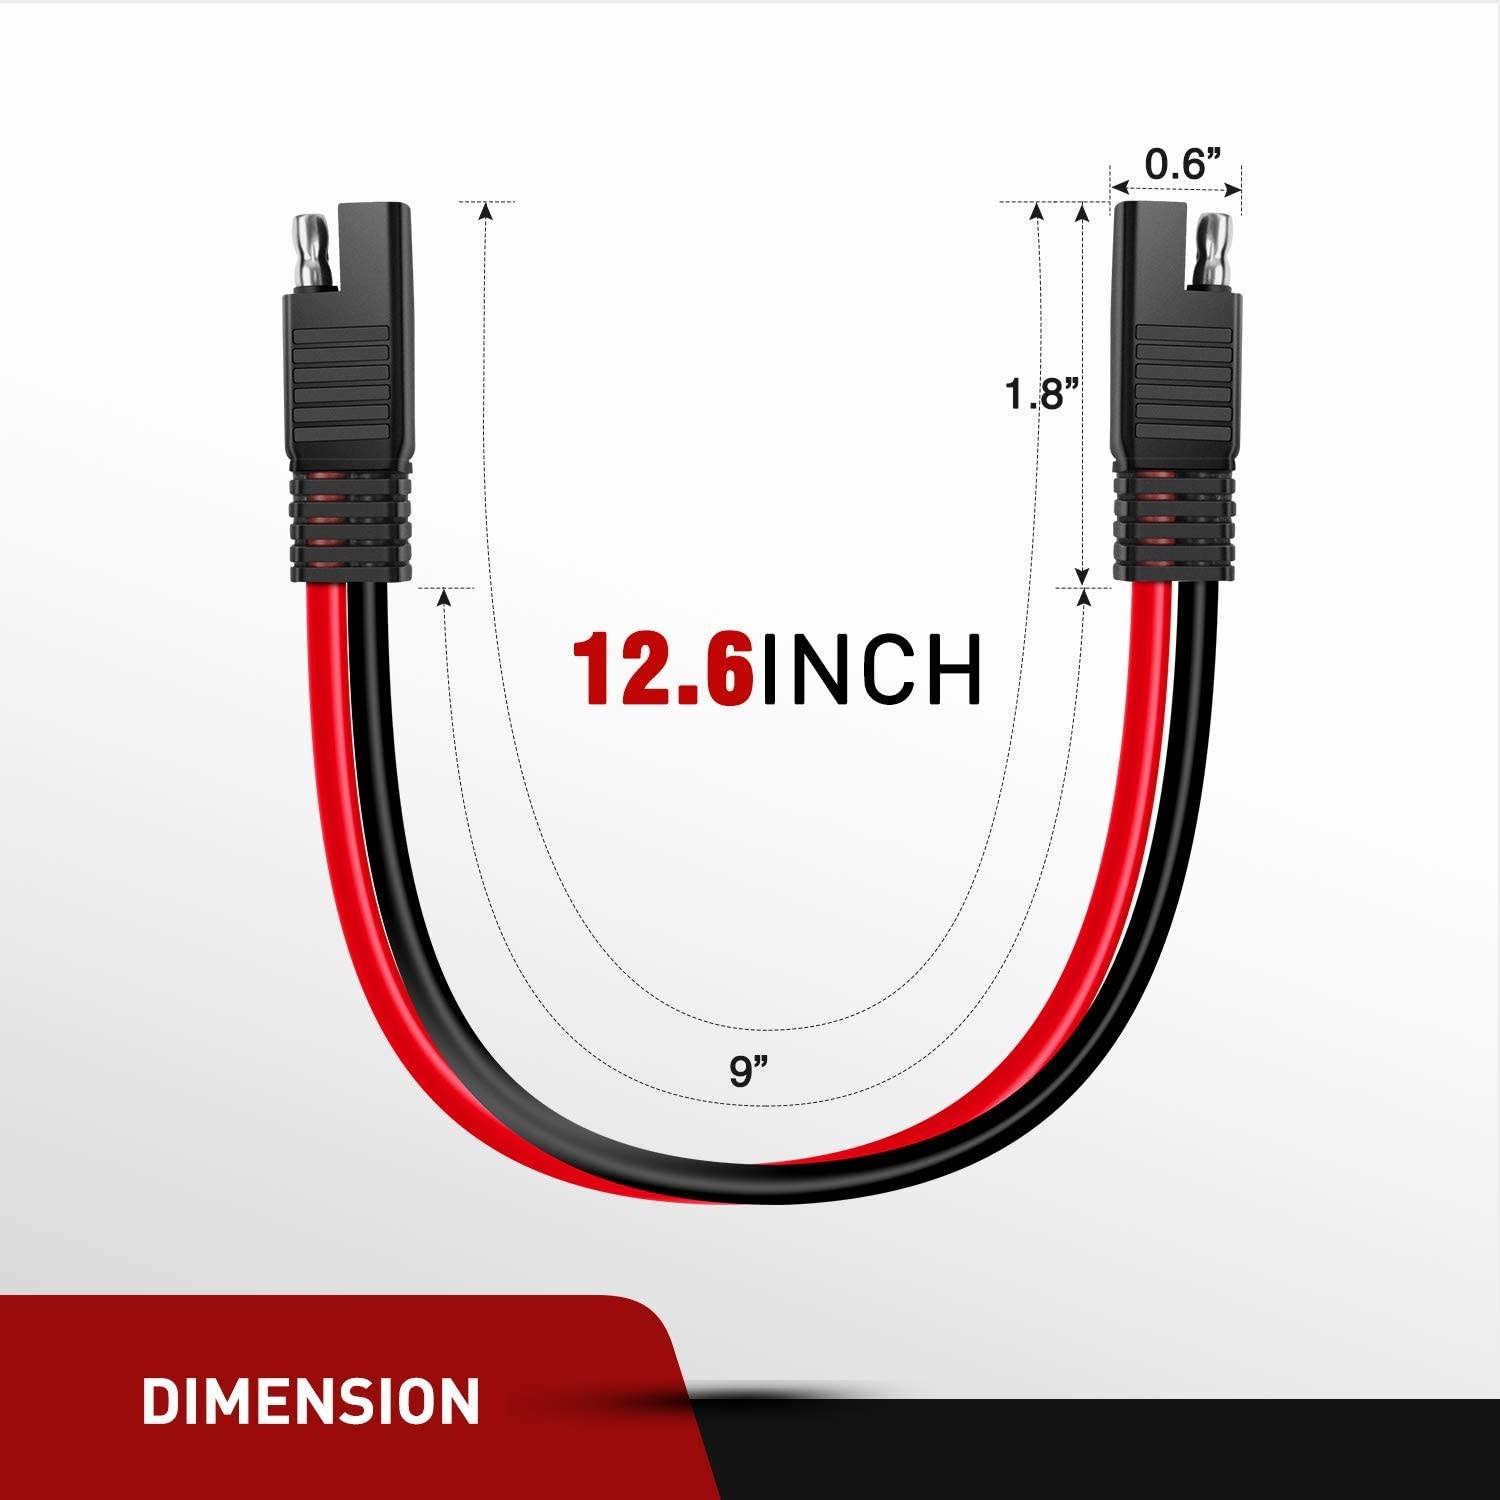 Nilight 10 Gauge 2 Pin Quick Disconnect Harness ( for Trailers)